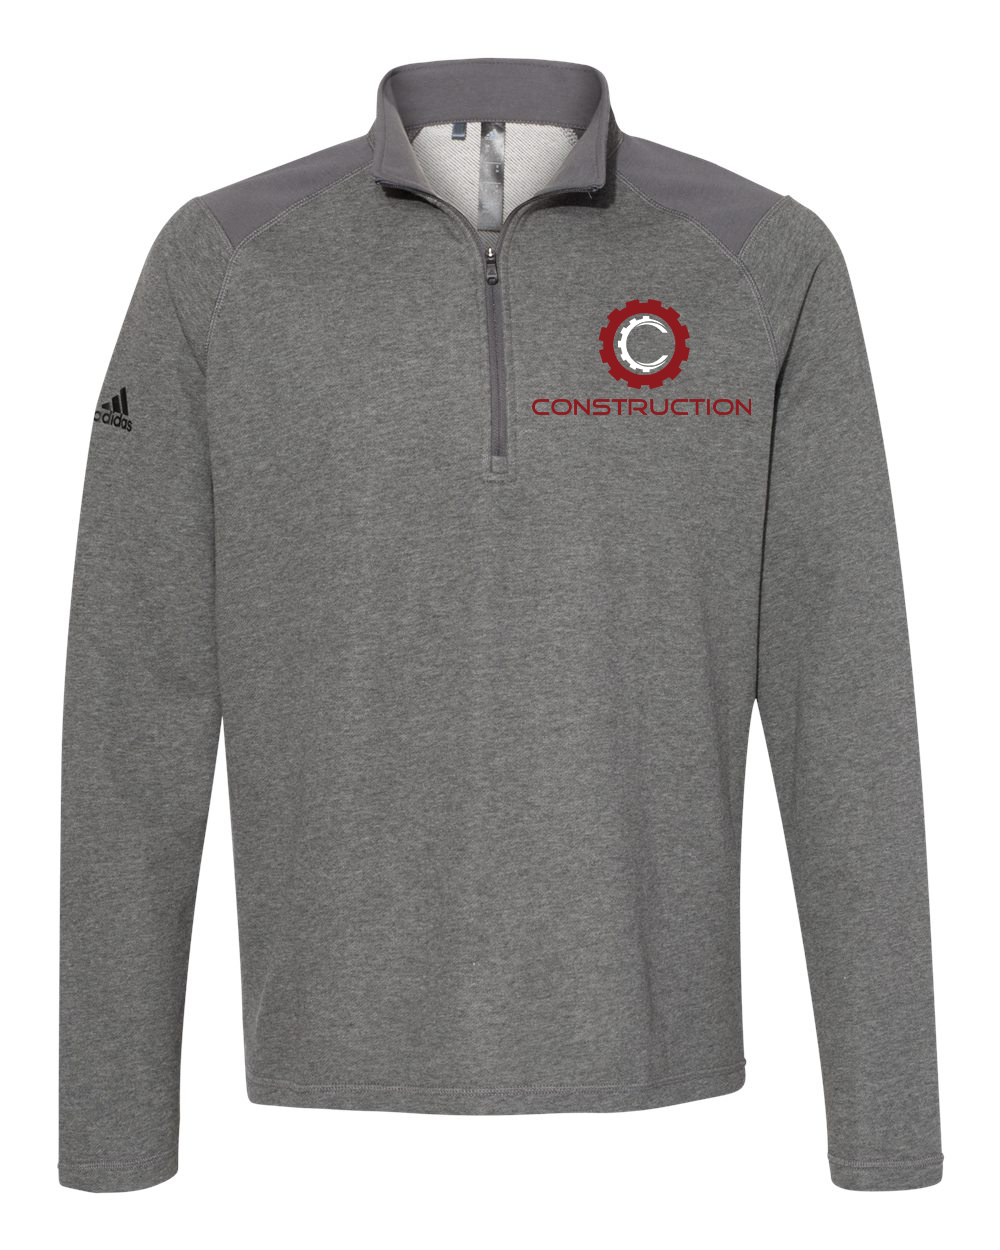 custom design of Adidas A463 - Heathered Quarter Zip Pullover with Colorblocked Shoulders